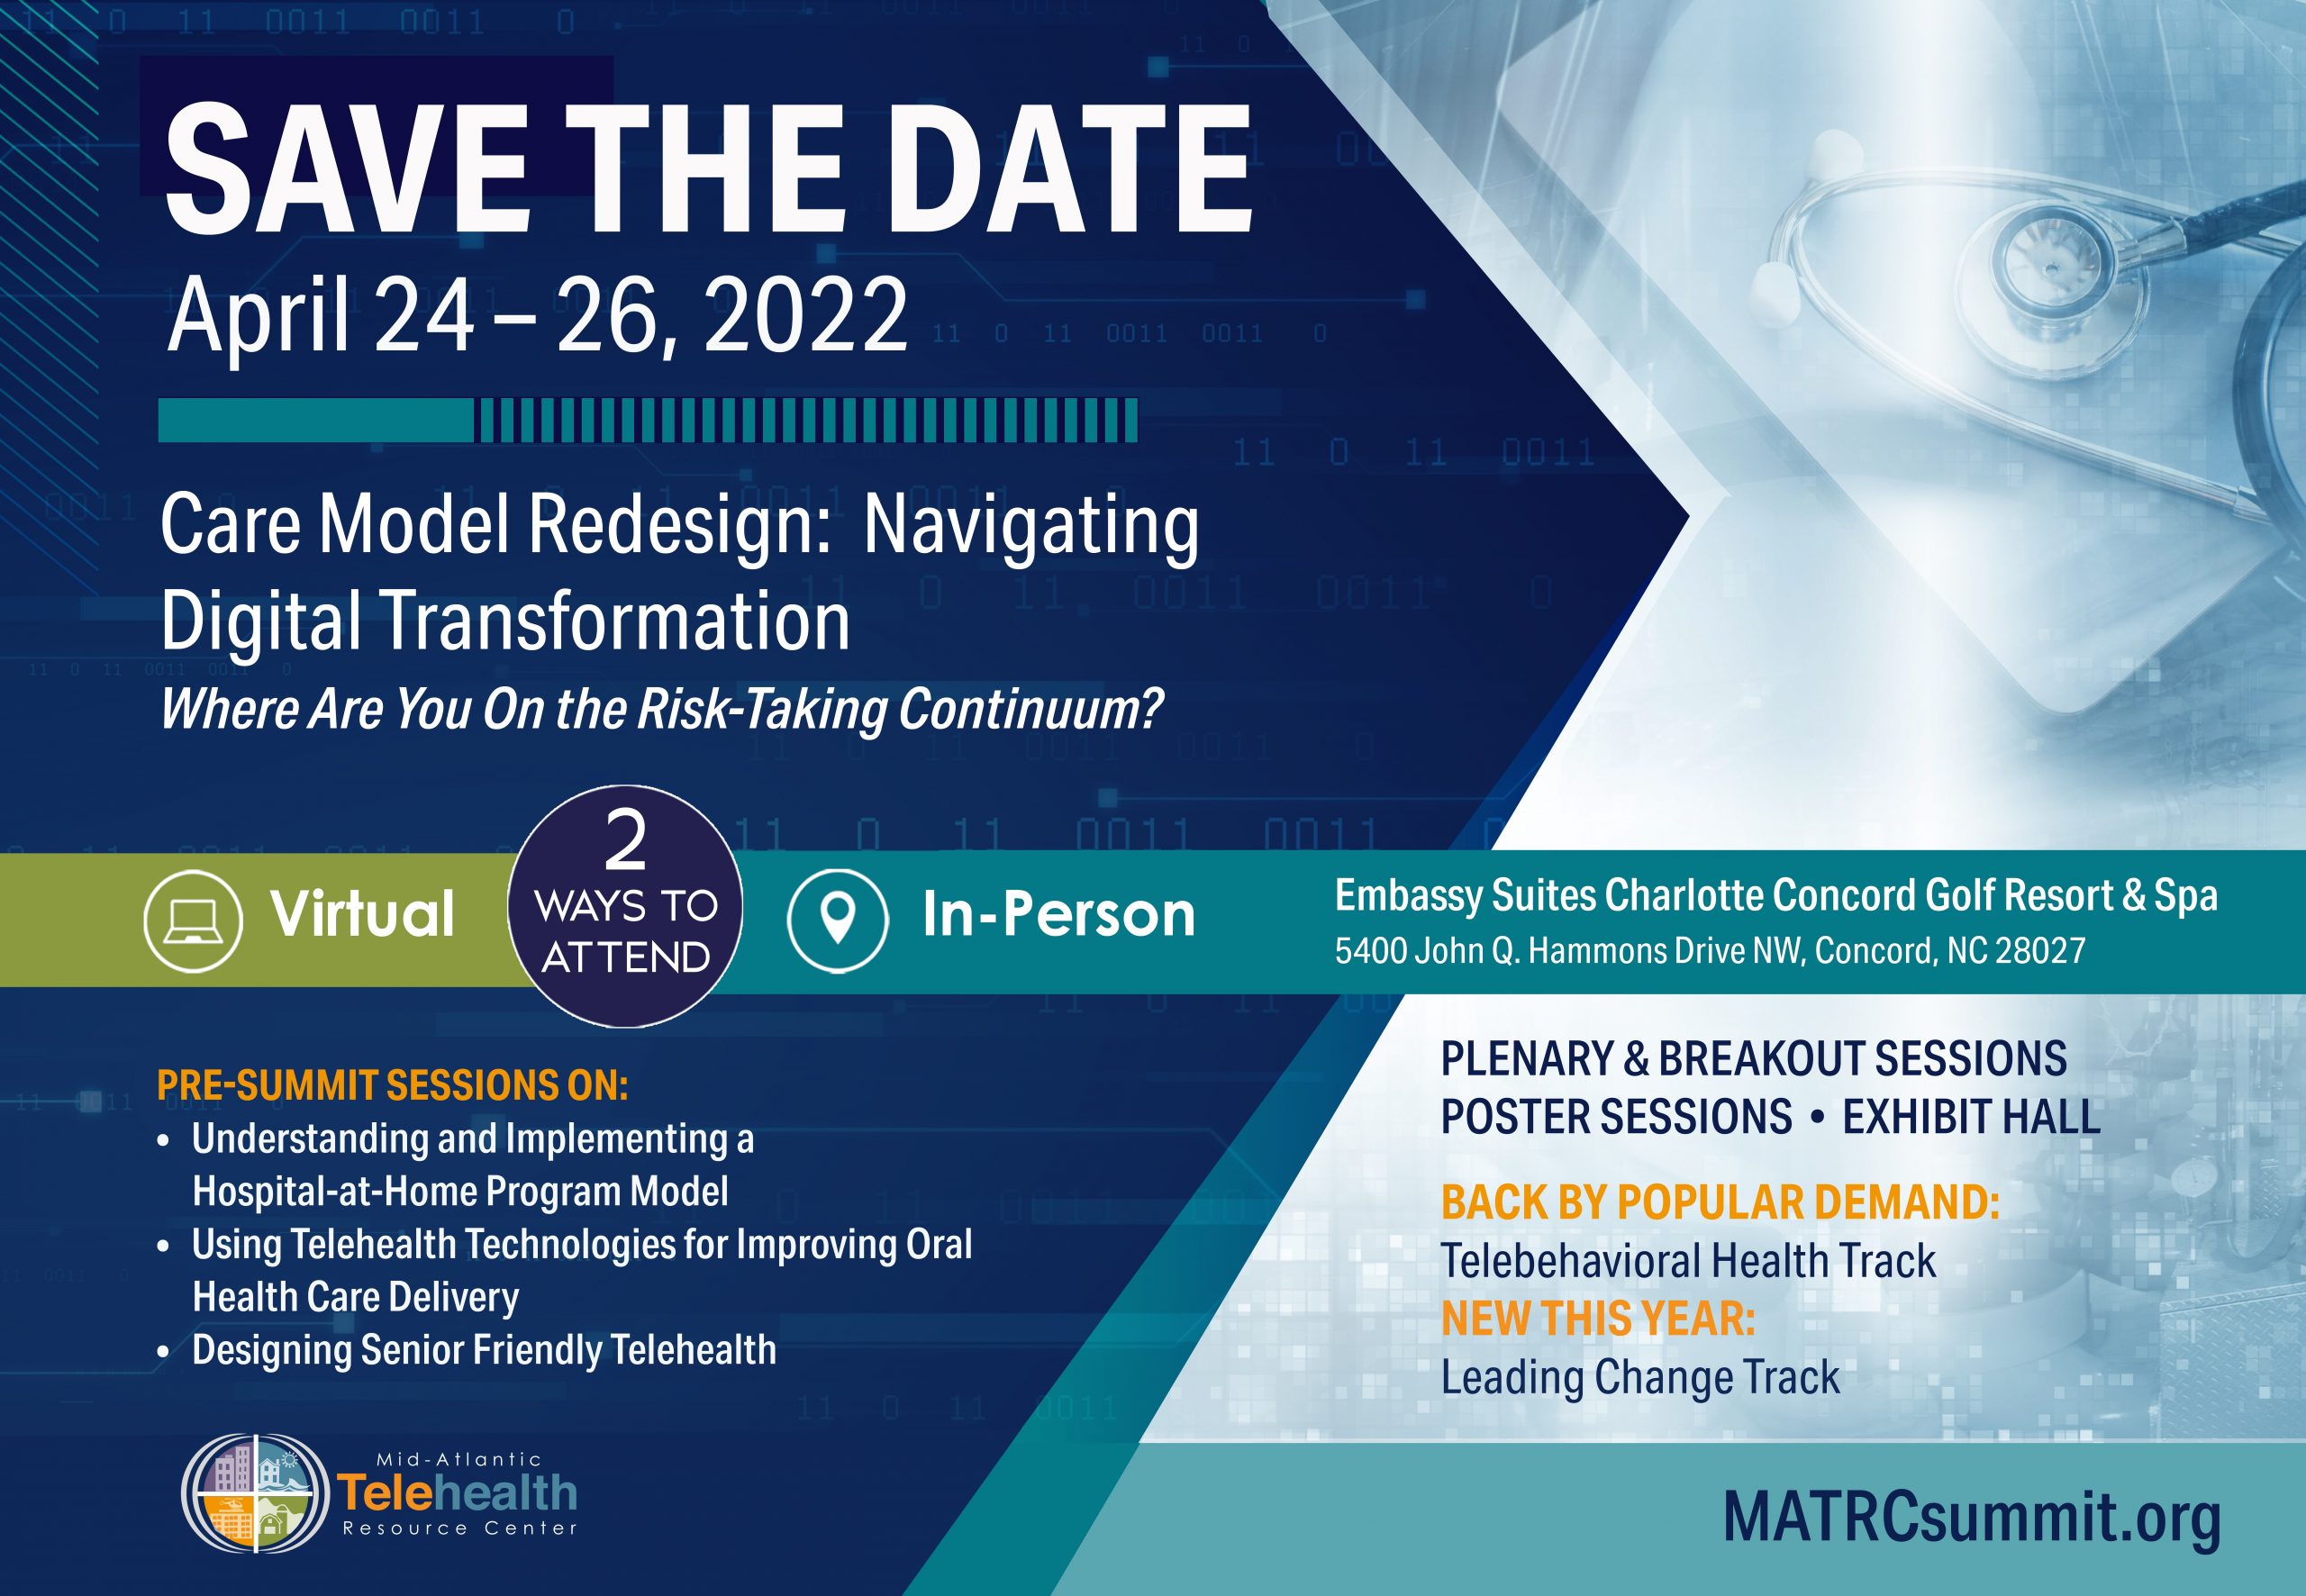 Save the Date for #MATRC2022!